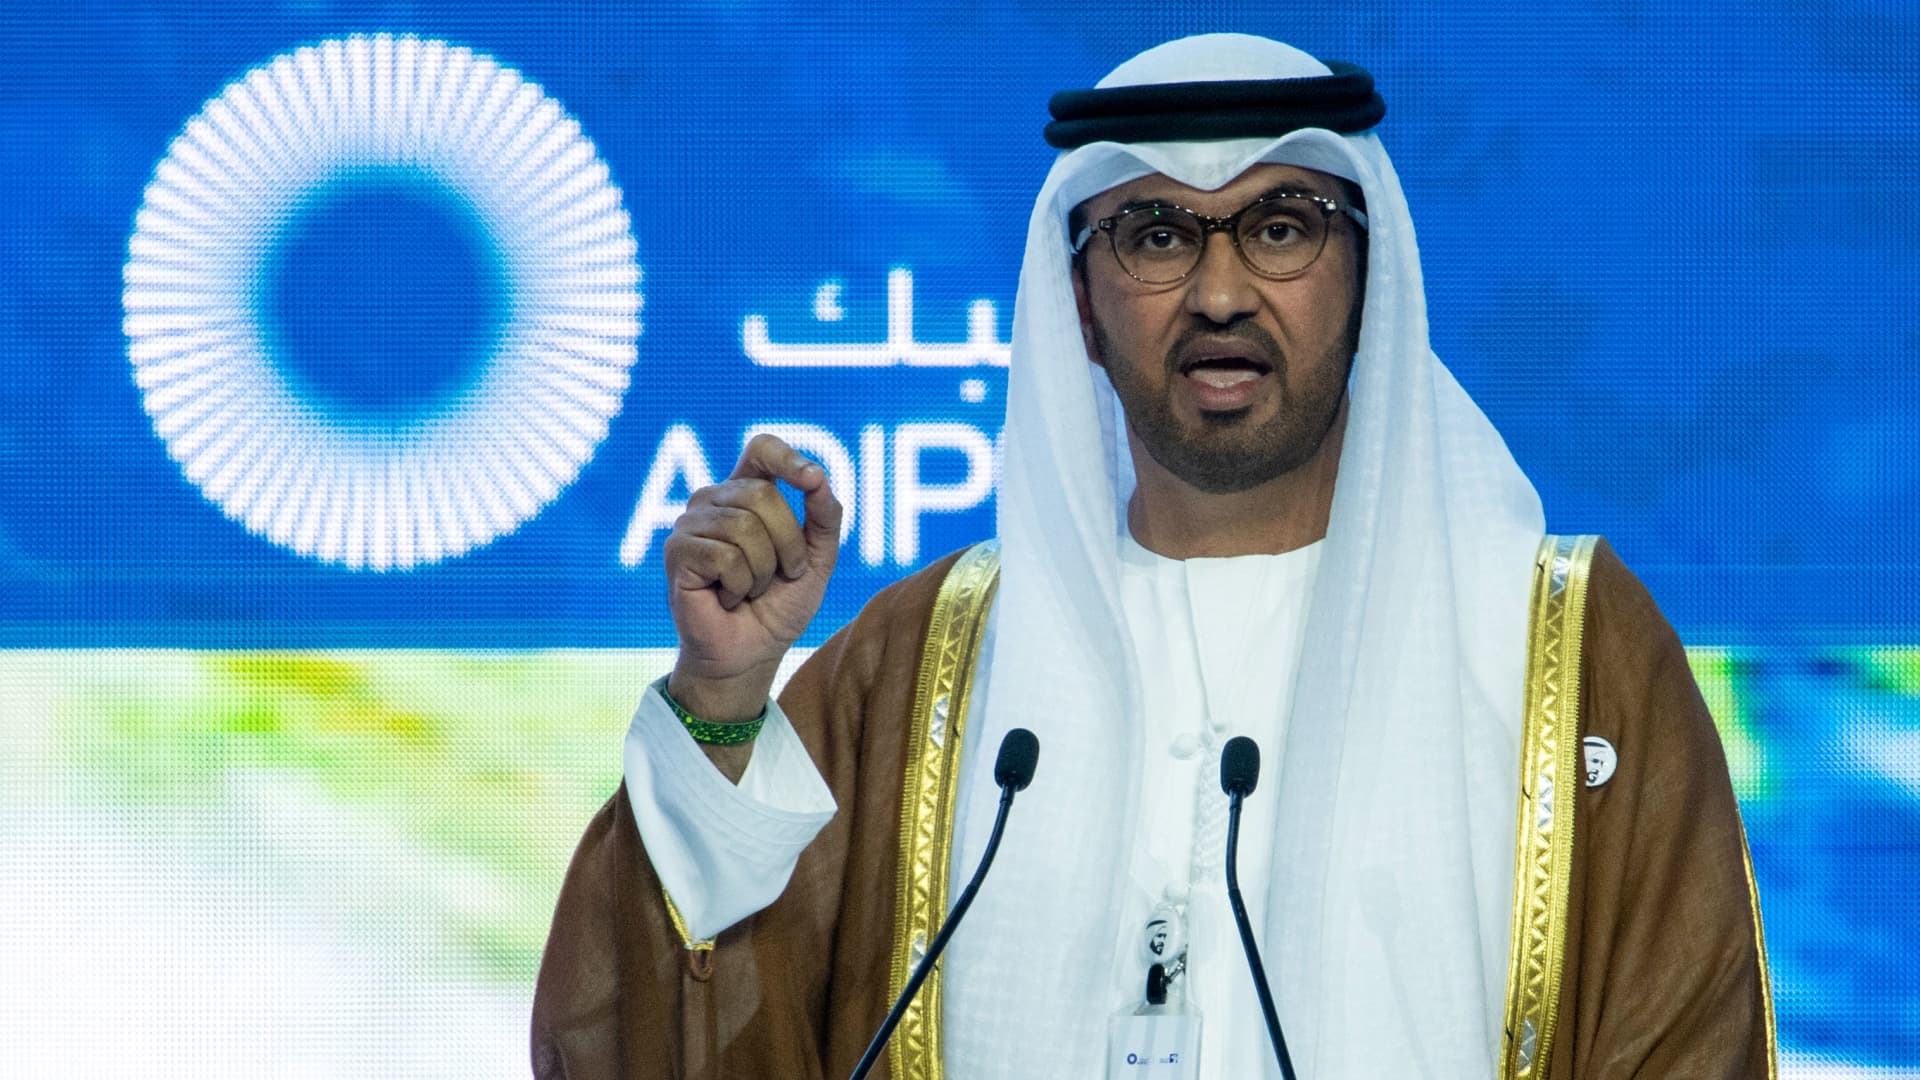 UAE reportedly planned to use COP28 climate summit to lobby for oil and gas deals